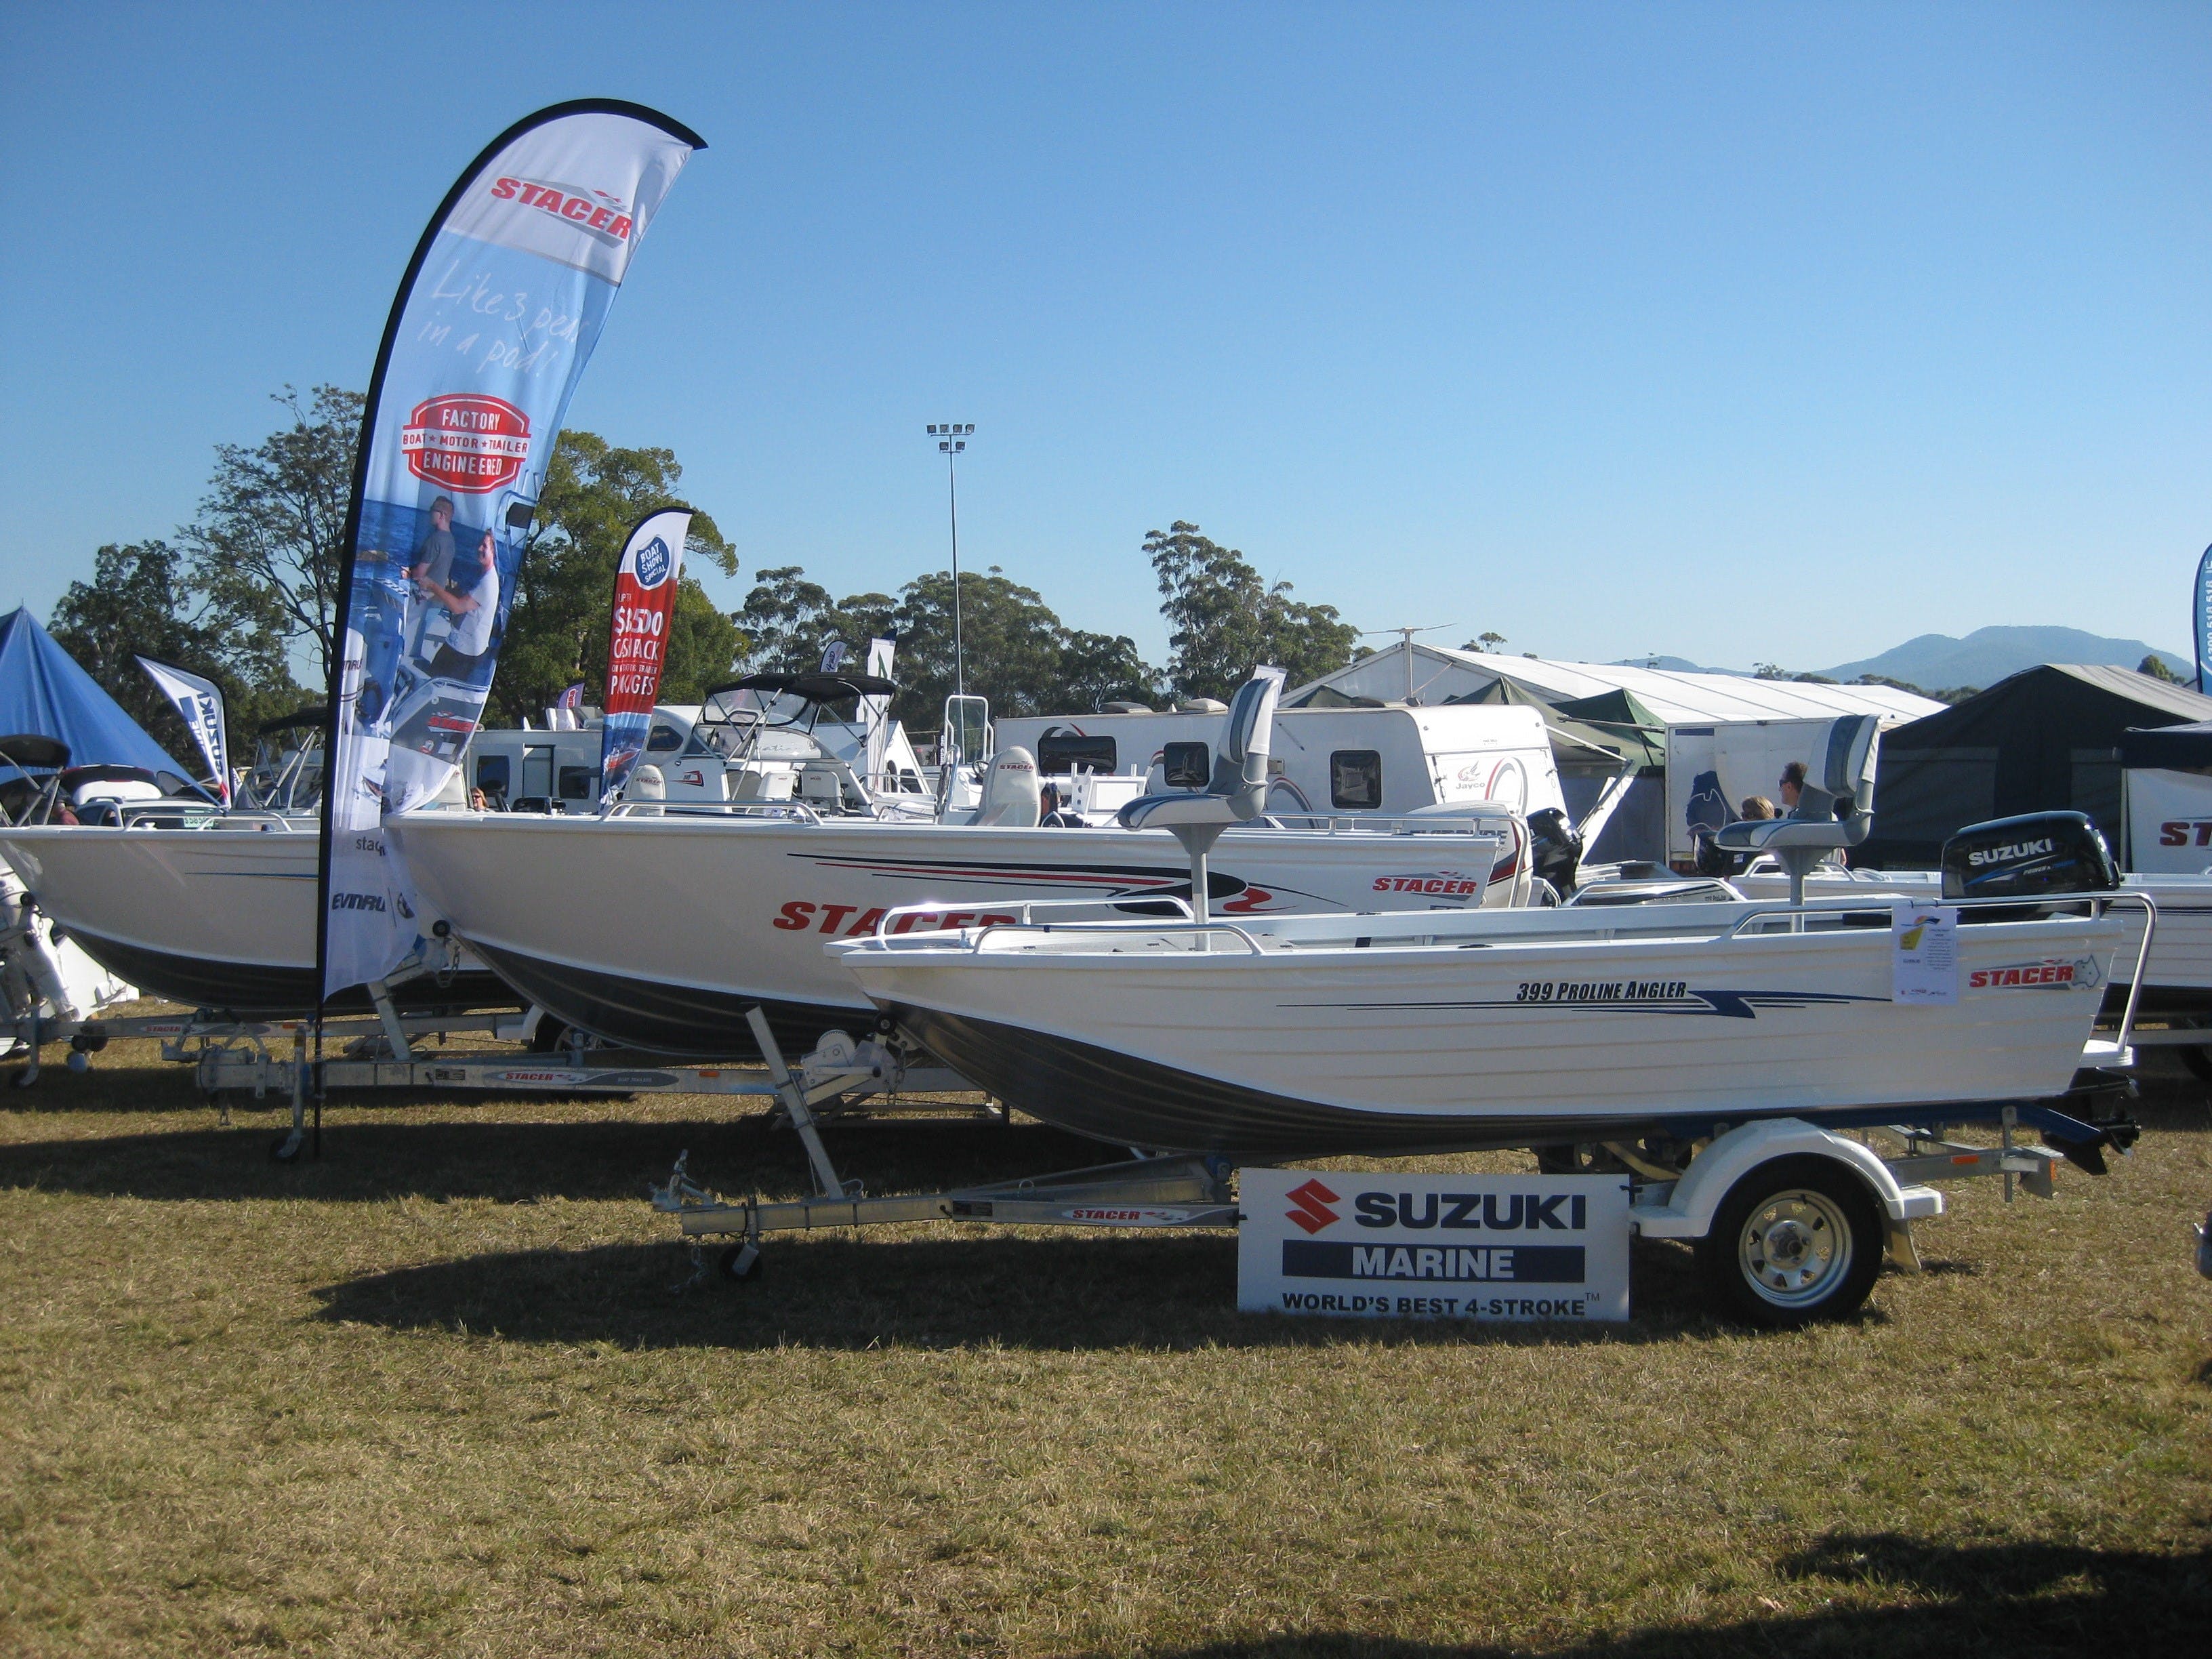 Mid North Coast Caravan Camping 4WD Fish and Boat Show - Townsville Tourism